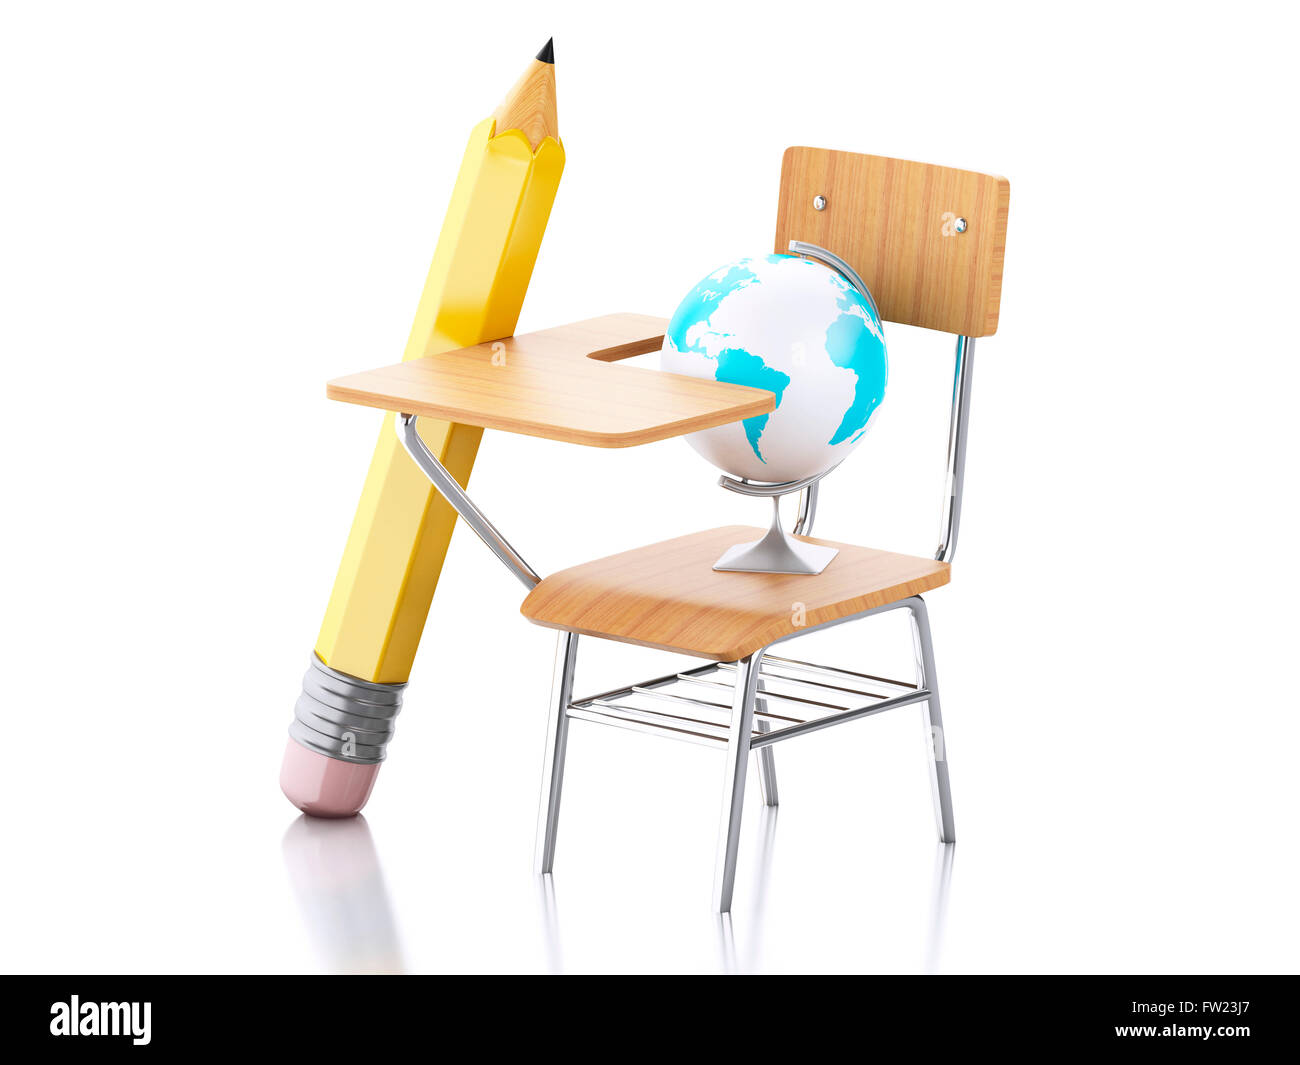 3D Illustration. School desk, pencil, chair and globe. Education concept. Isolated white background. Stock Photo